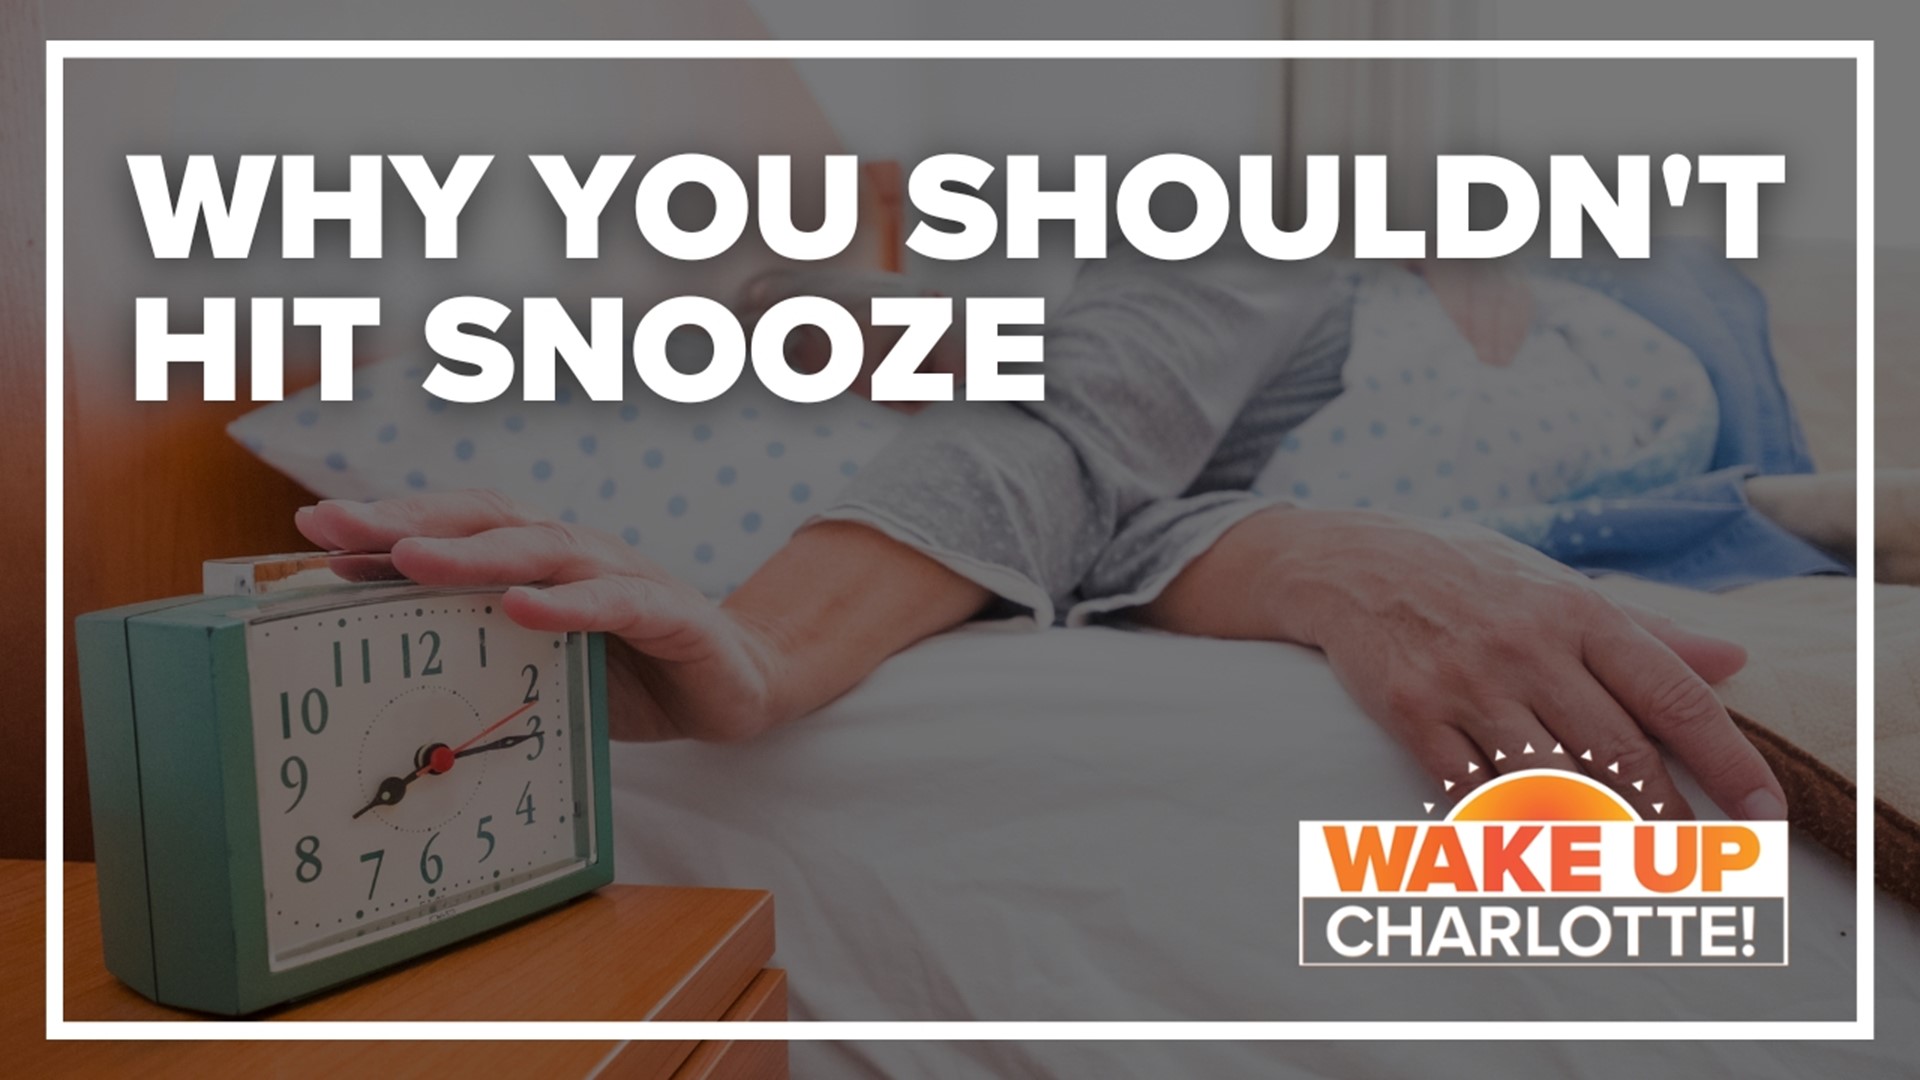 Most of us like a little "snooze" in between alarms, but could it actually be bad for your health?